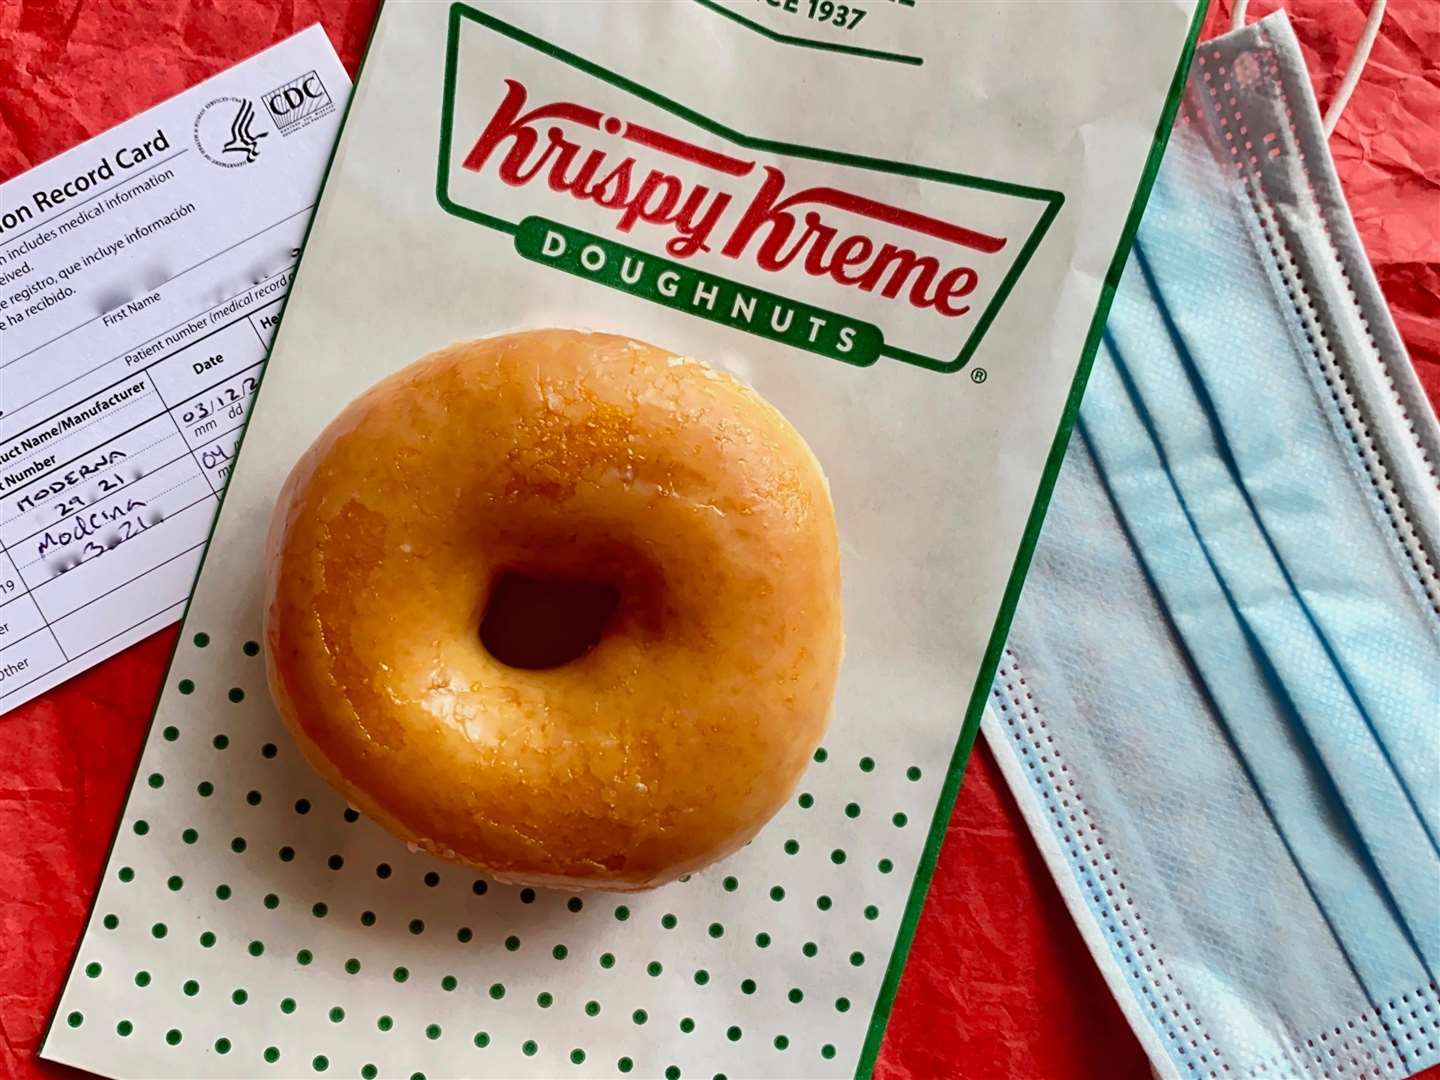 A new Krispy Kreme counter is understood to be opening in Inverness.